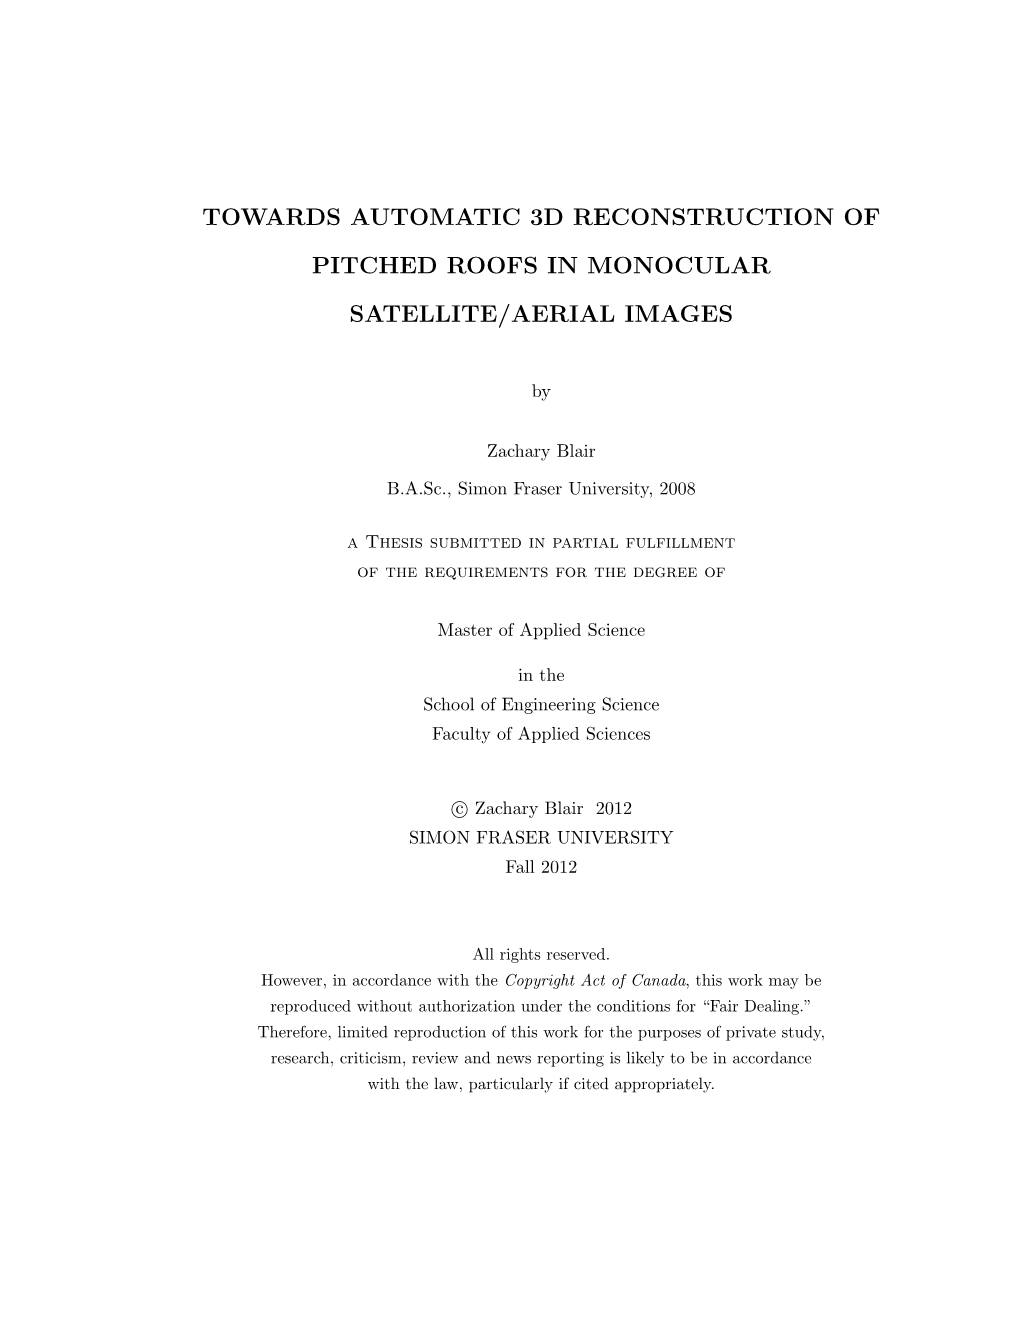 Towards Automatic 3D Reconstruction of Pitched Roofs in Monocular Satellite/Aerial Images